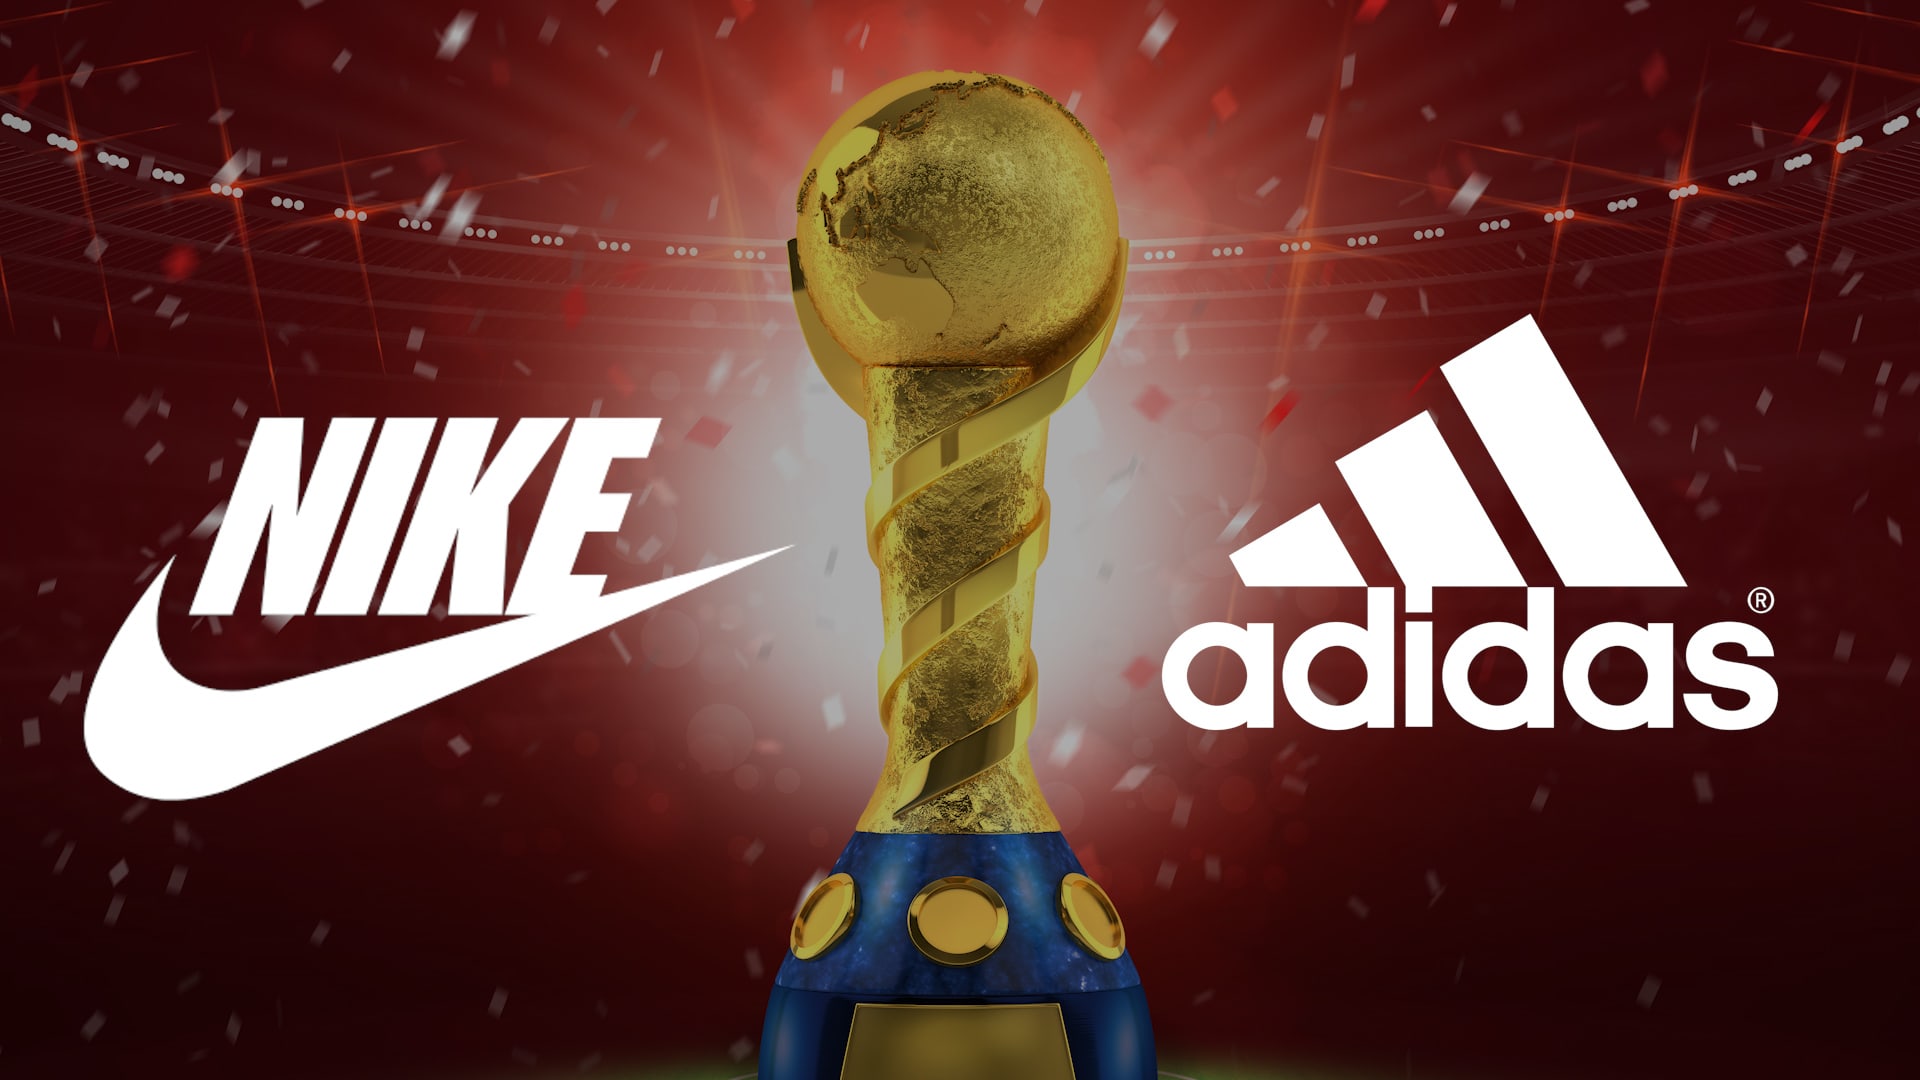 license play piano Spicy FIFA World Cup: Nike and Adidas face off at FIFA World Cup